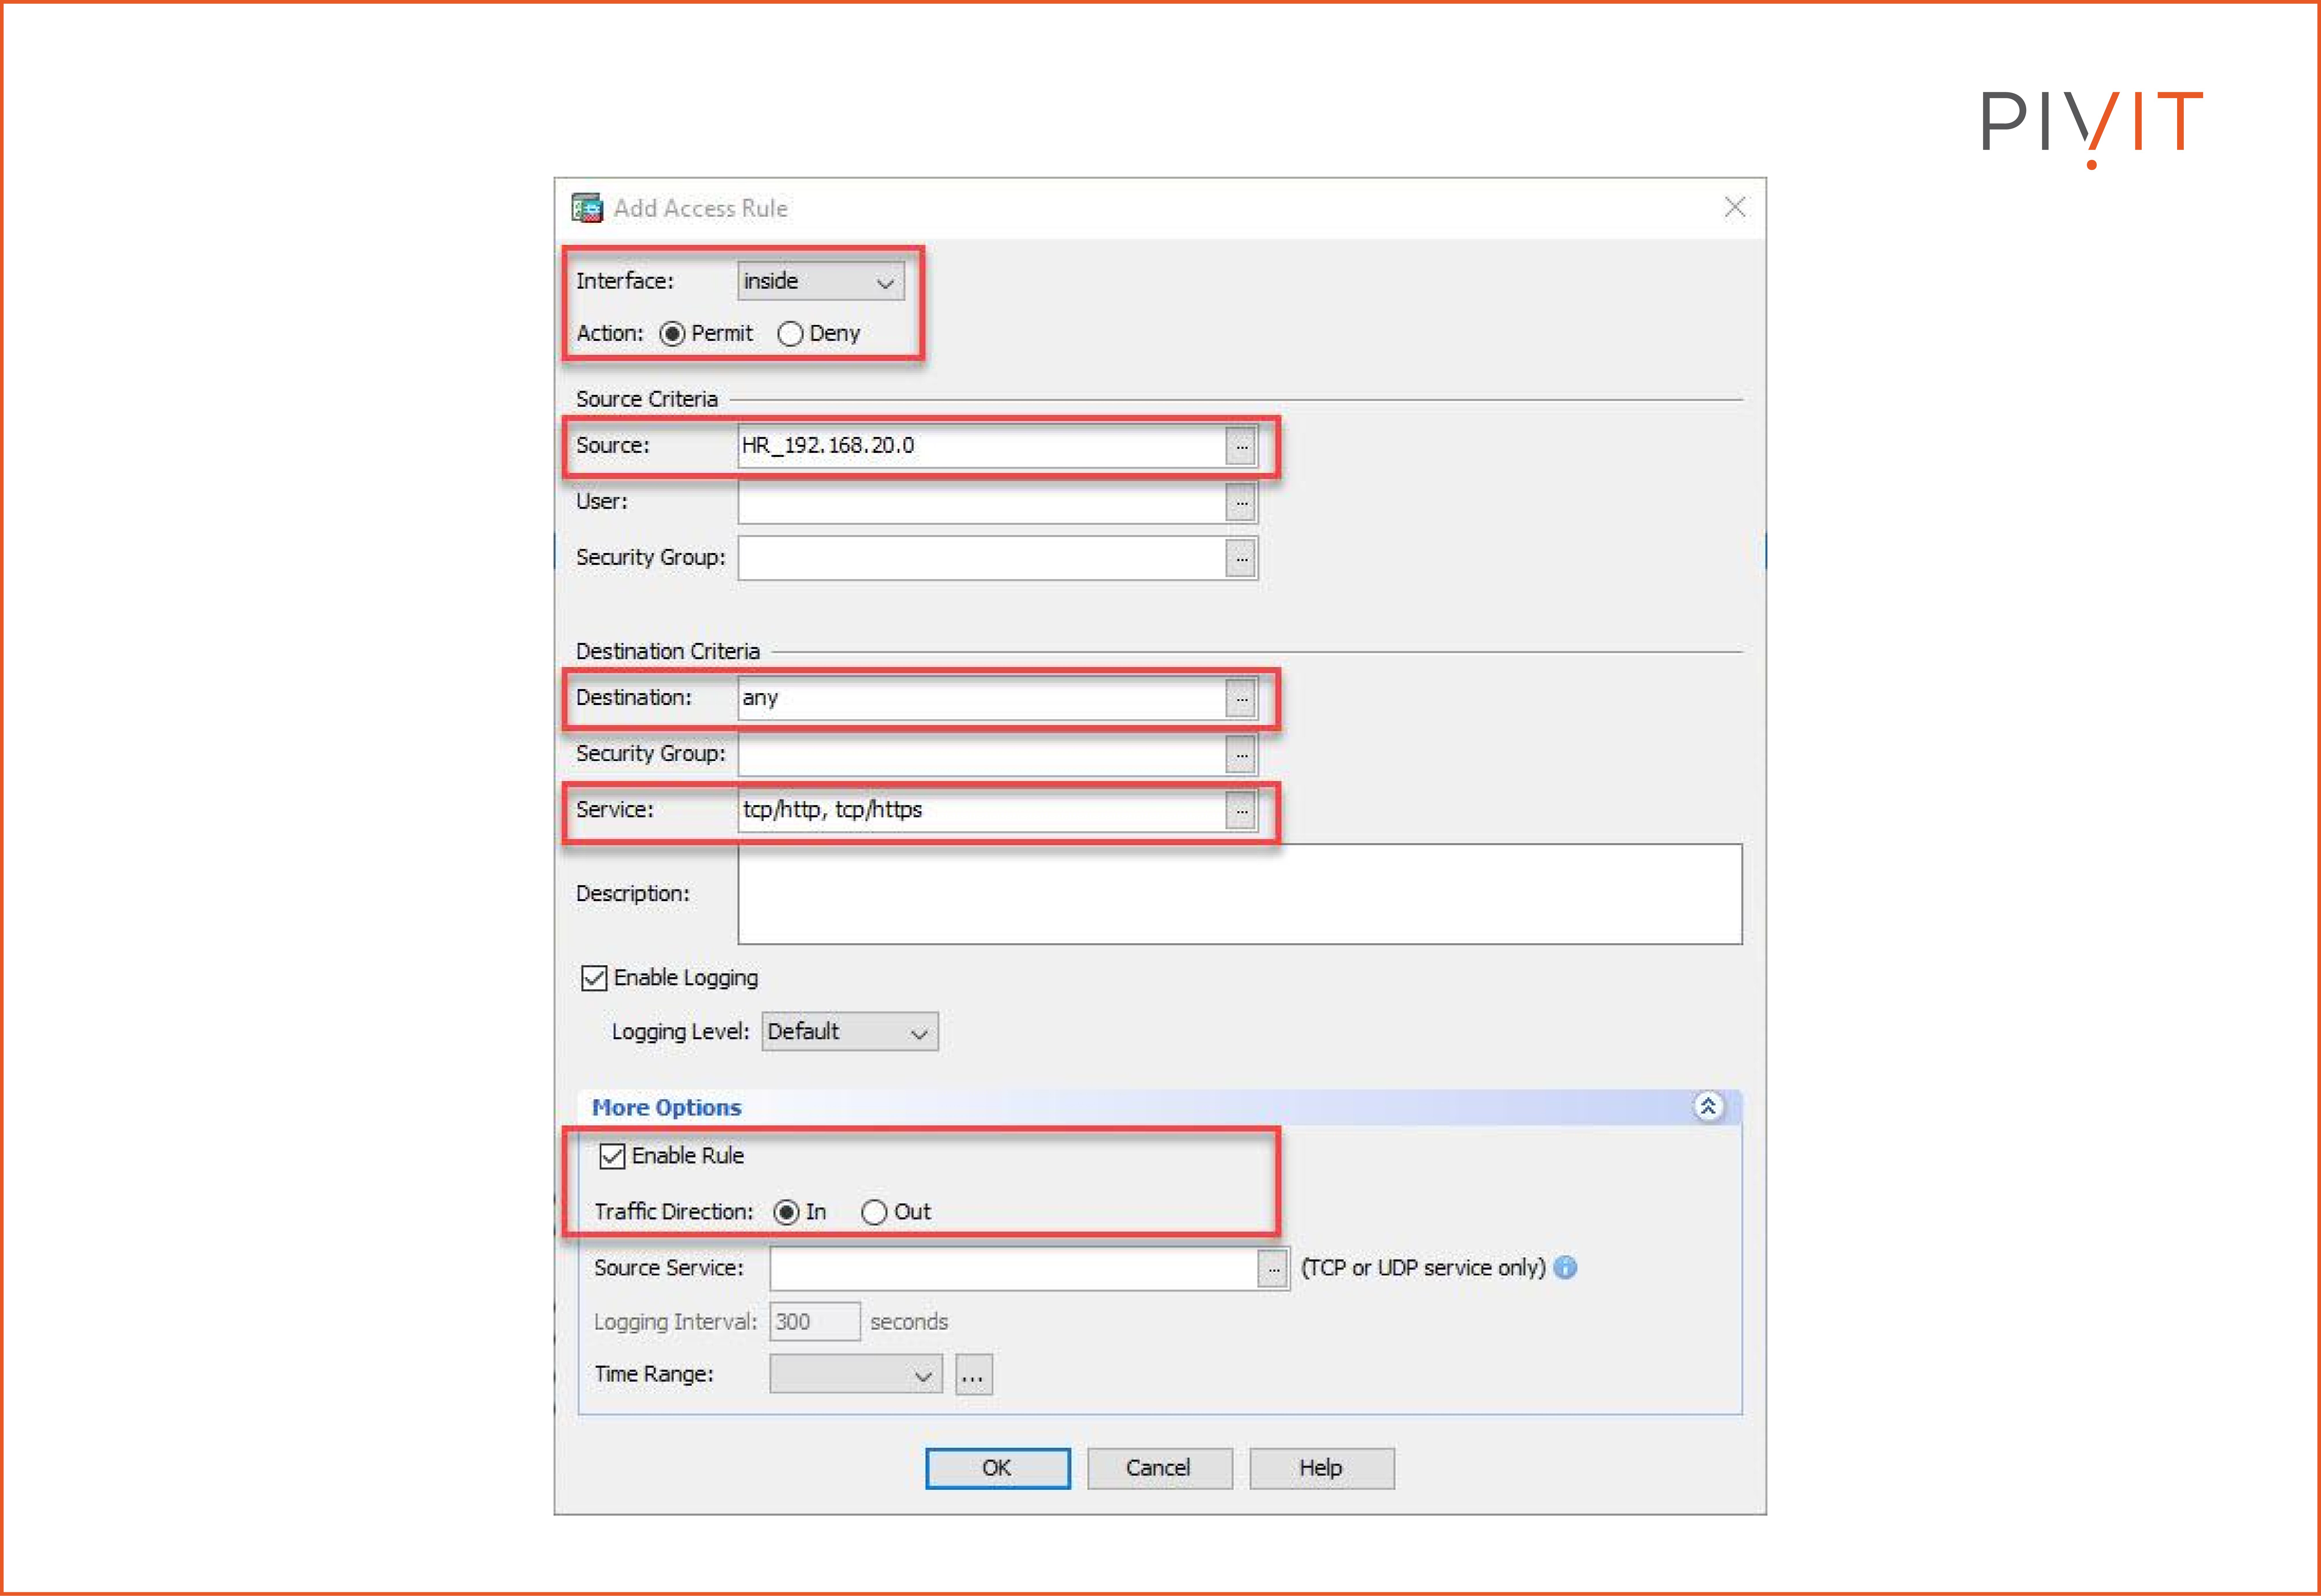 Configuring access rule on the inside interface in an inbound direction to allow web traffic